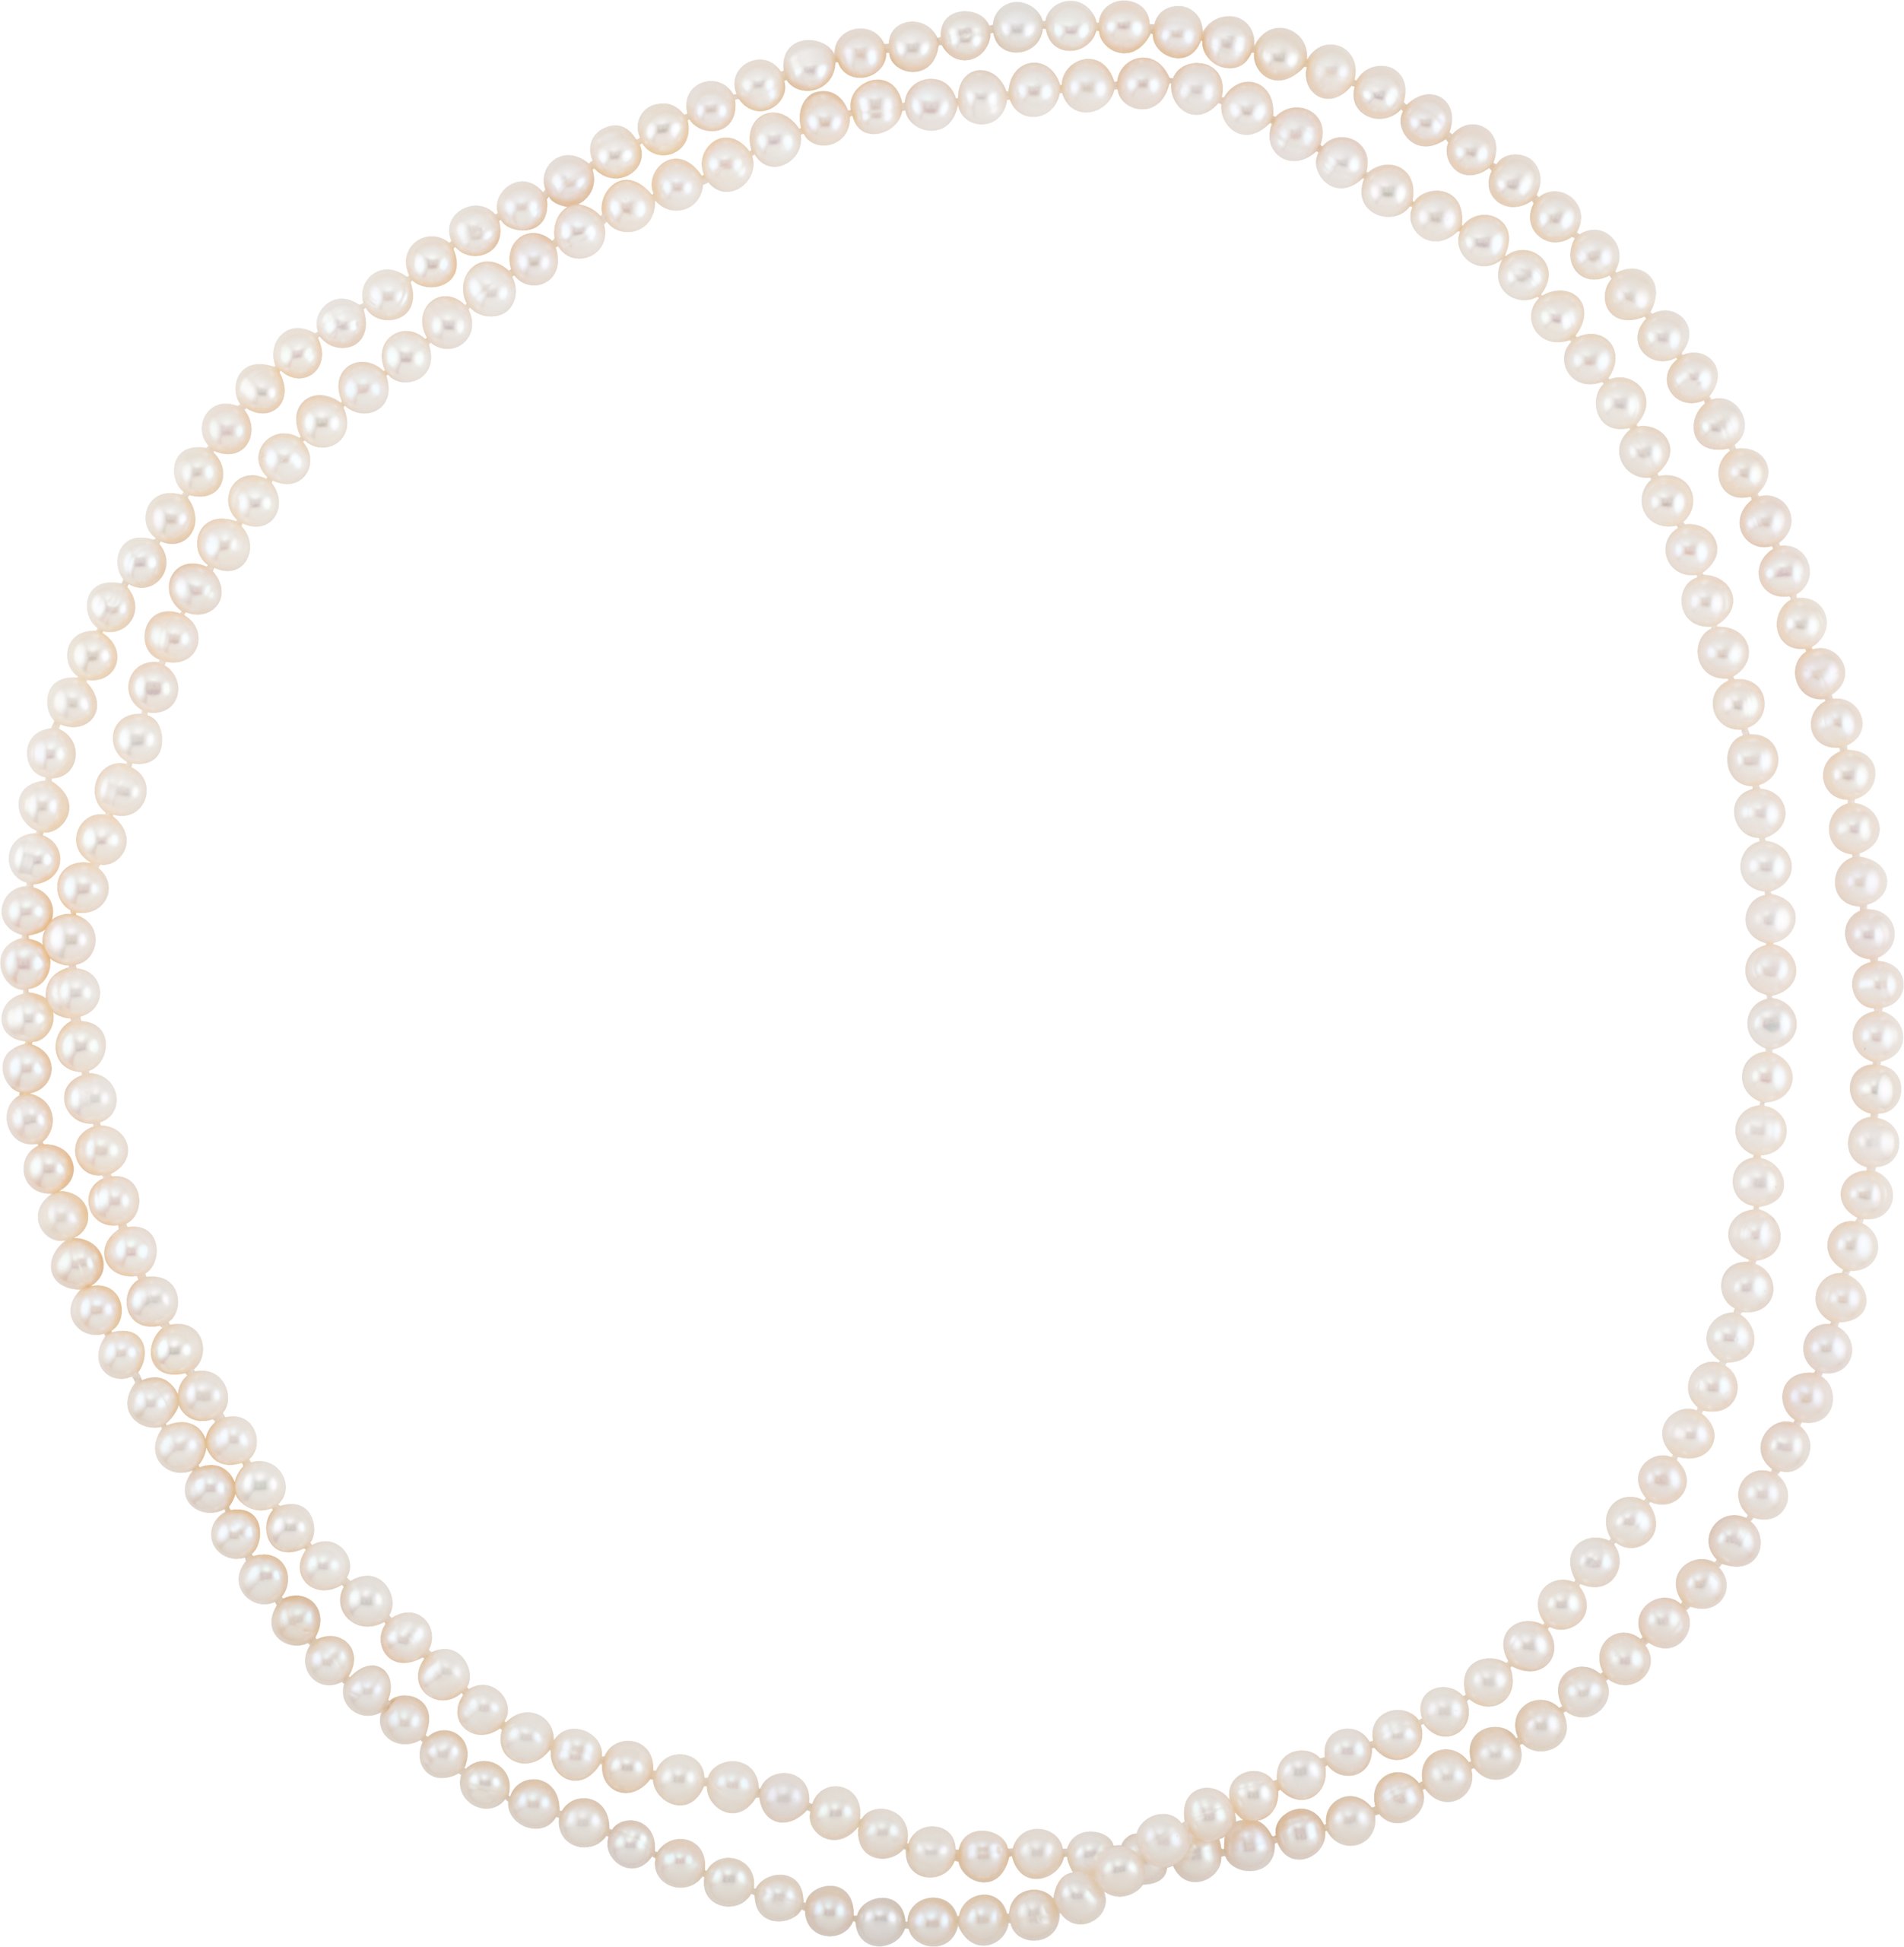 72 Inch White Freshwater Cultured Pearl Rope 8 to 9mm Ref 961132